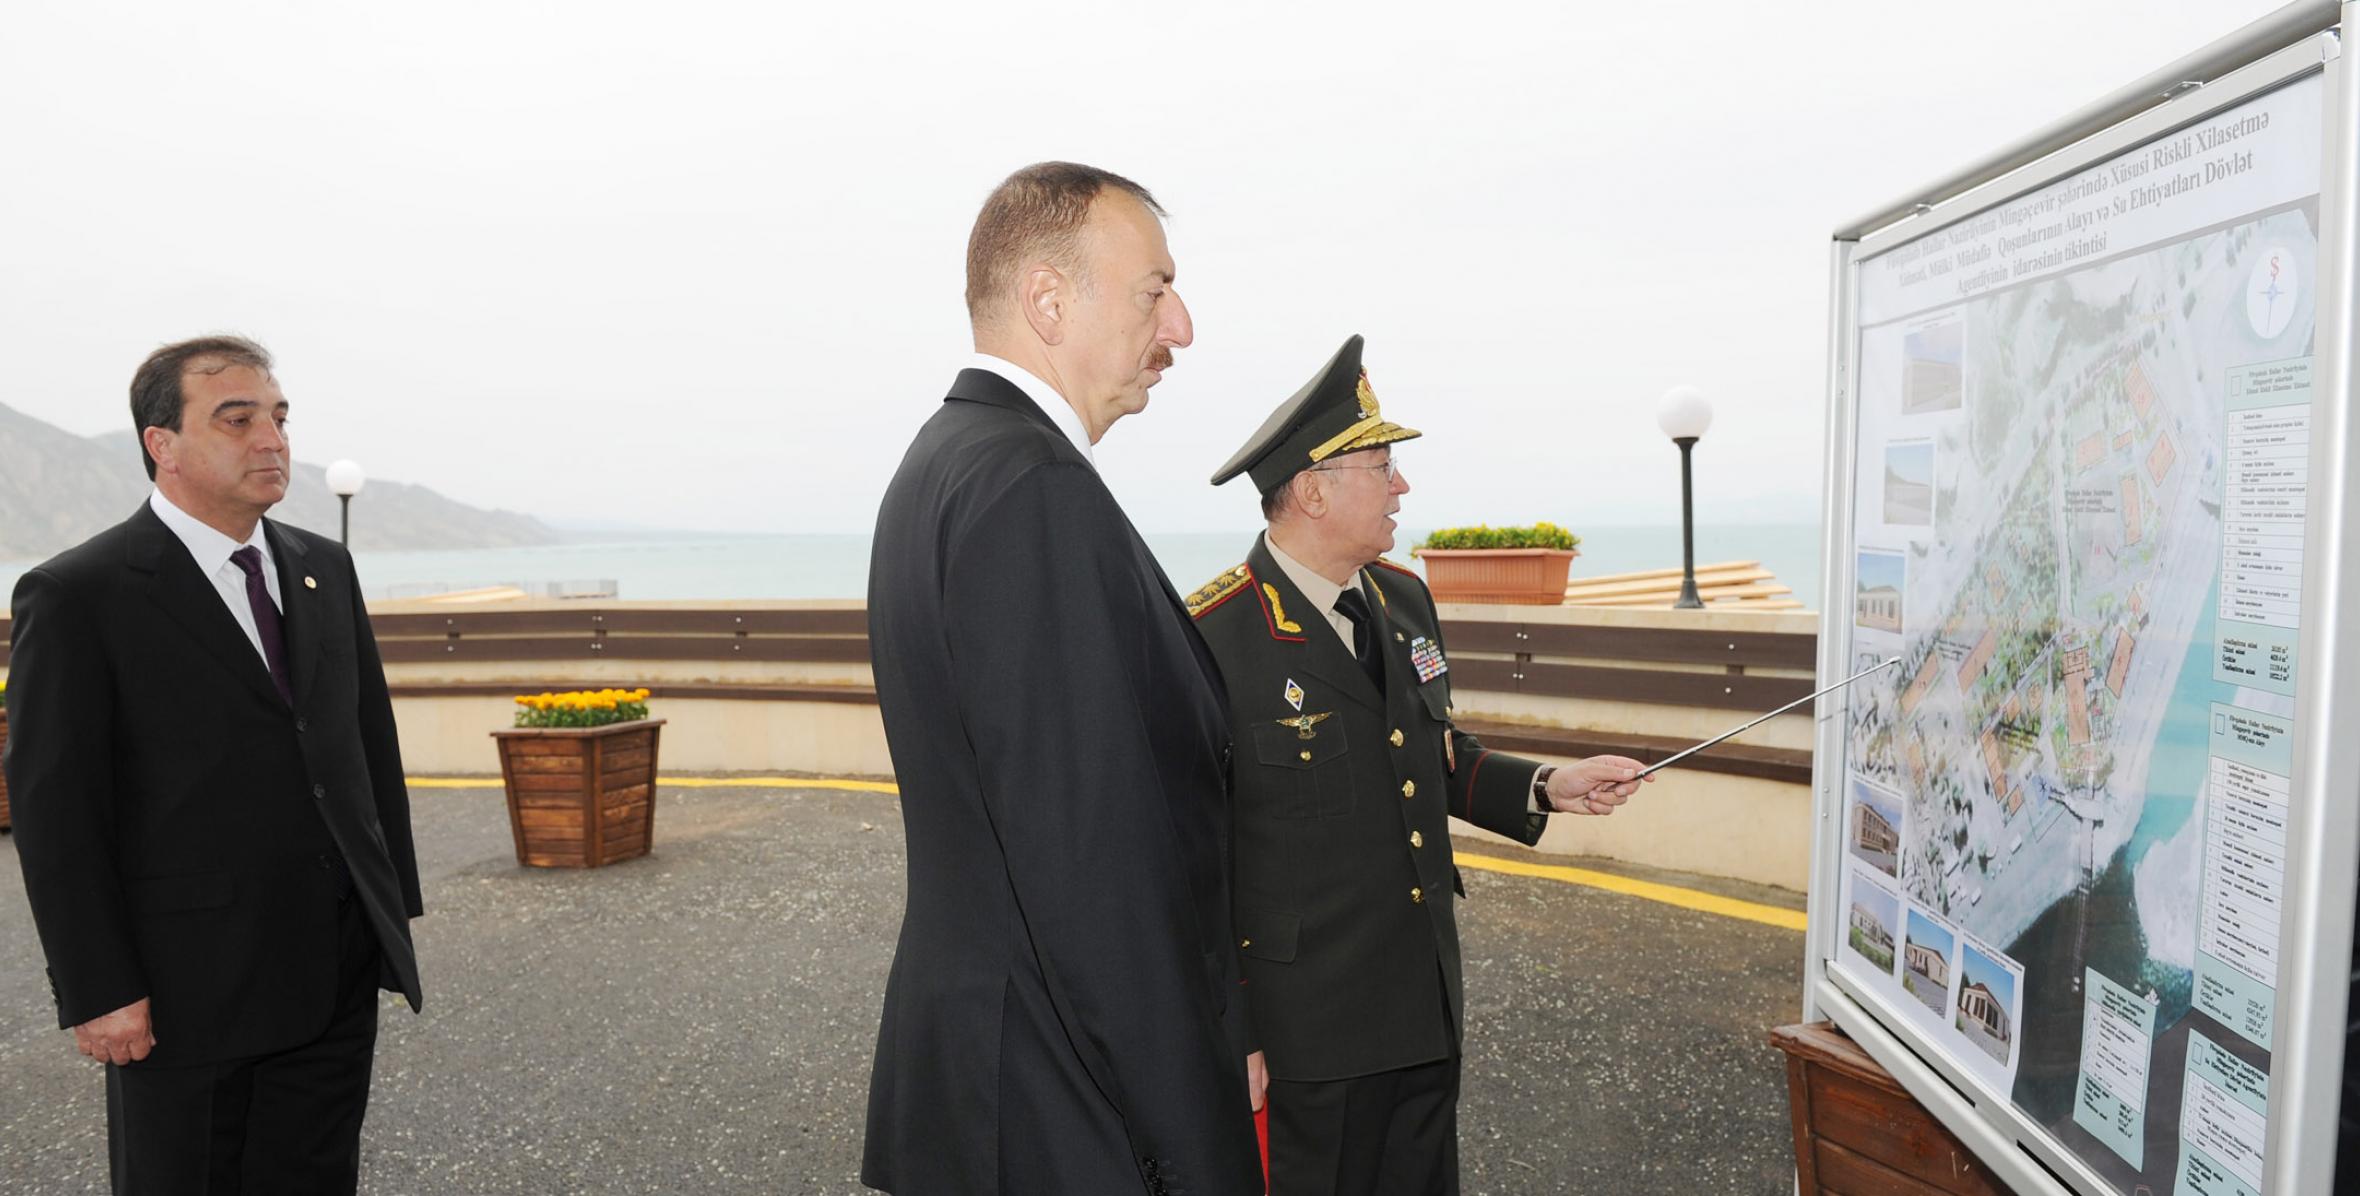 Ilham Aliyev reviewed the recreation complex on the banks of the River Kura in Mingachevir after its reconstruction